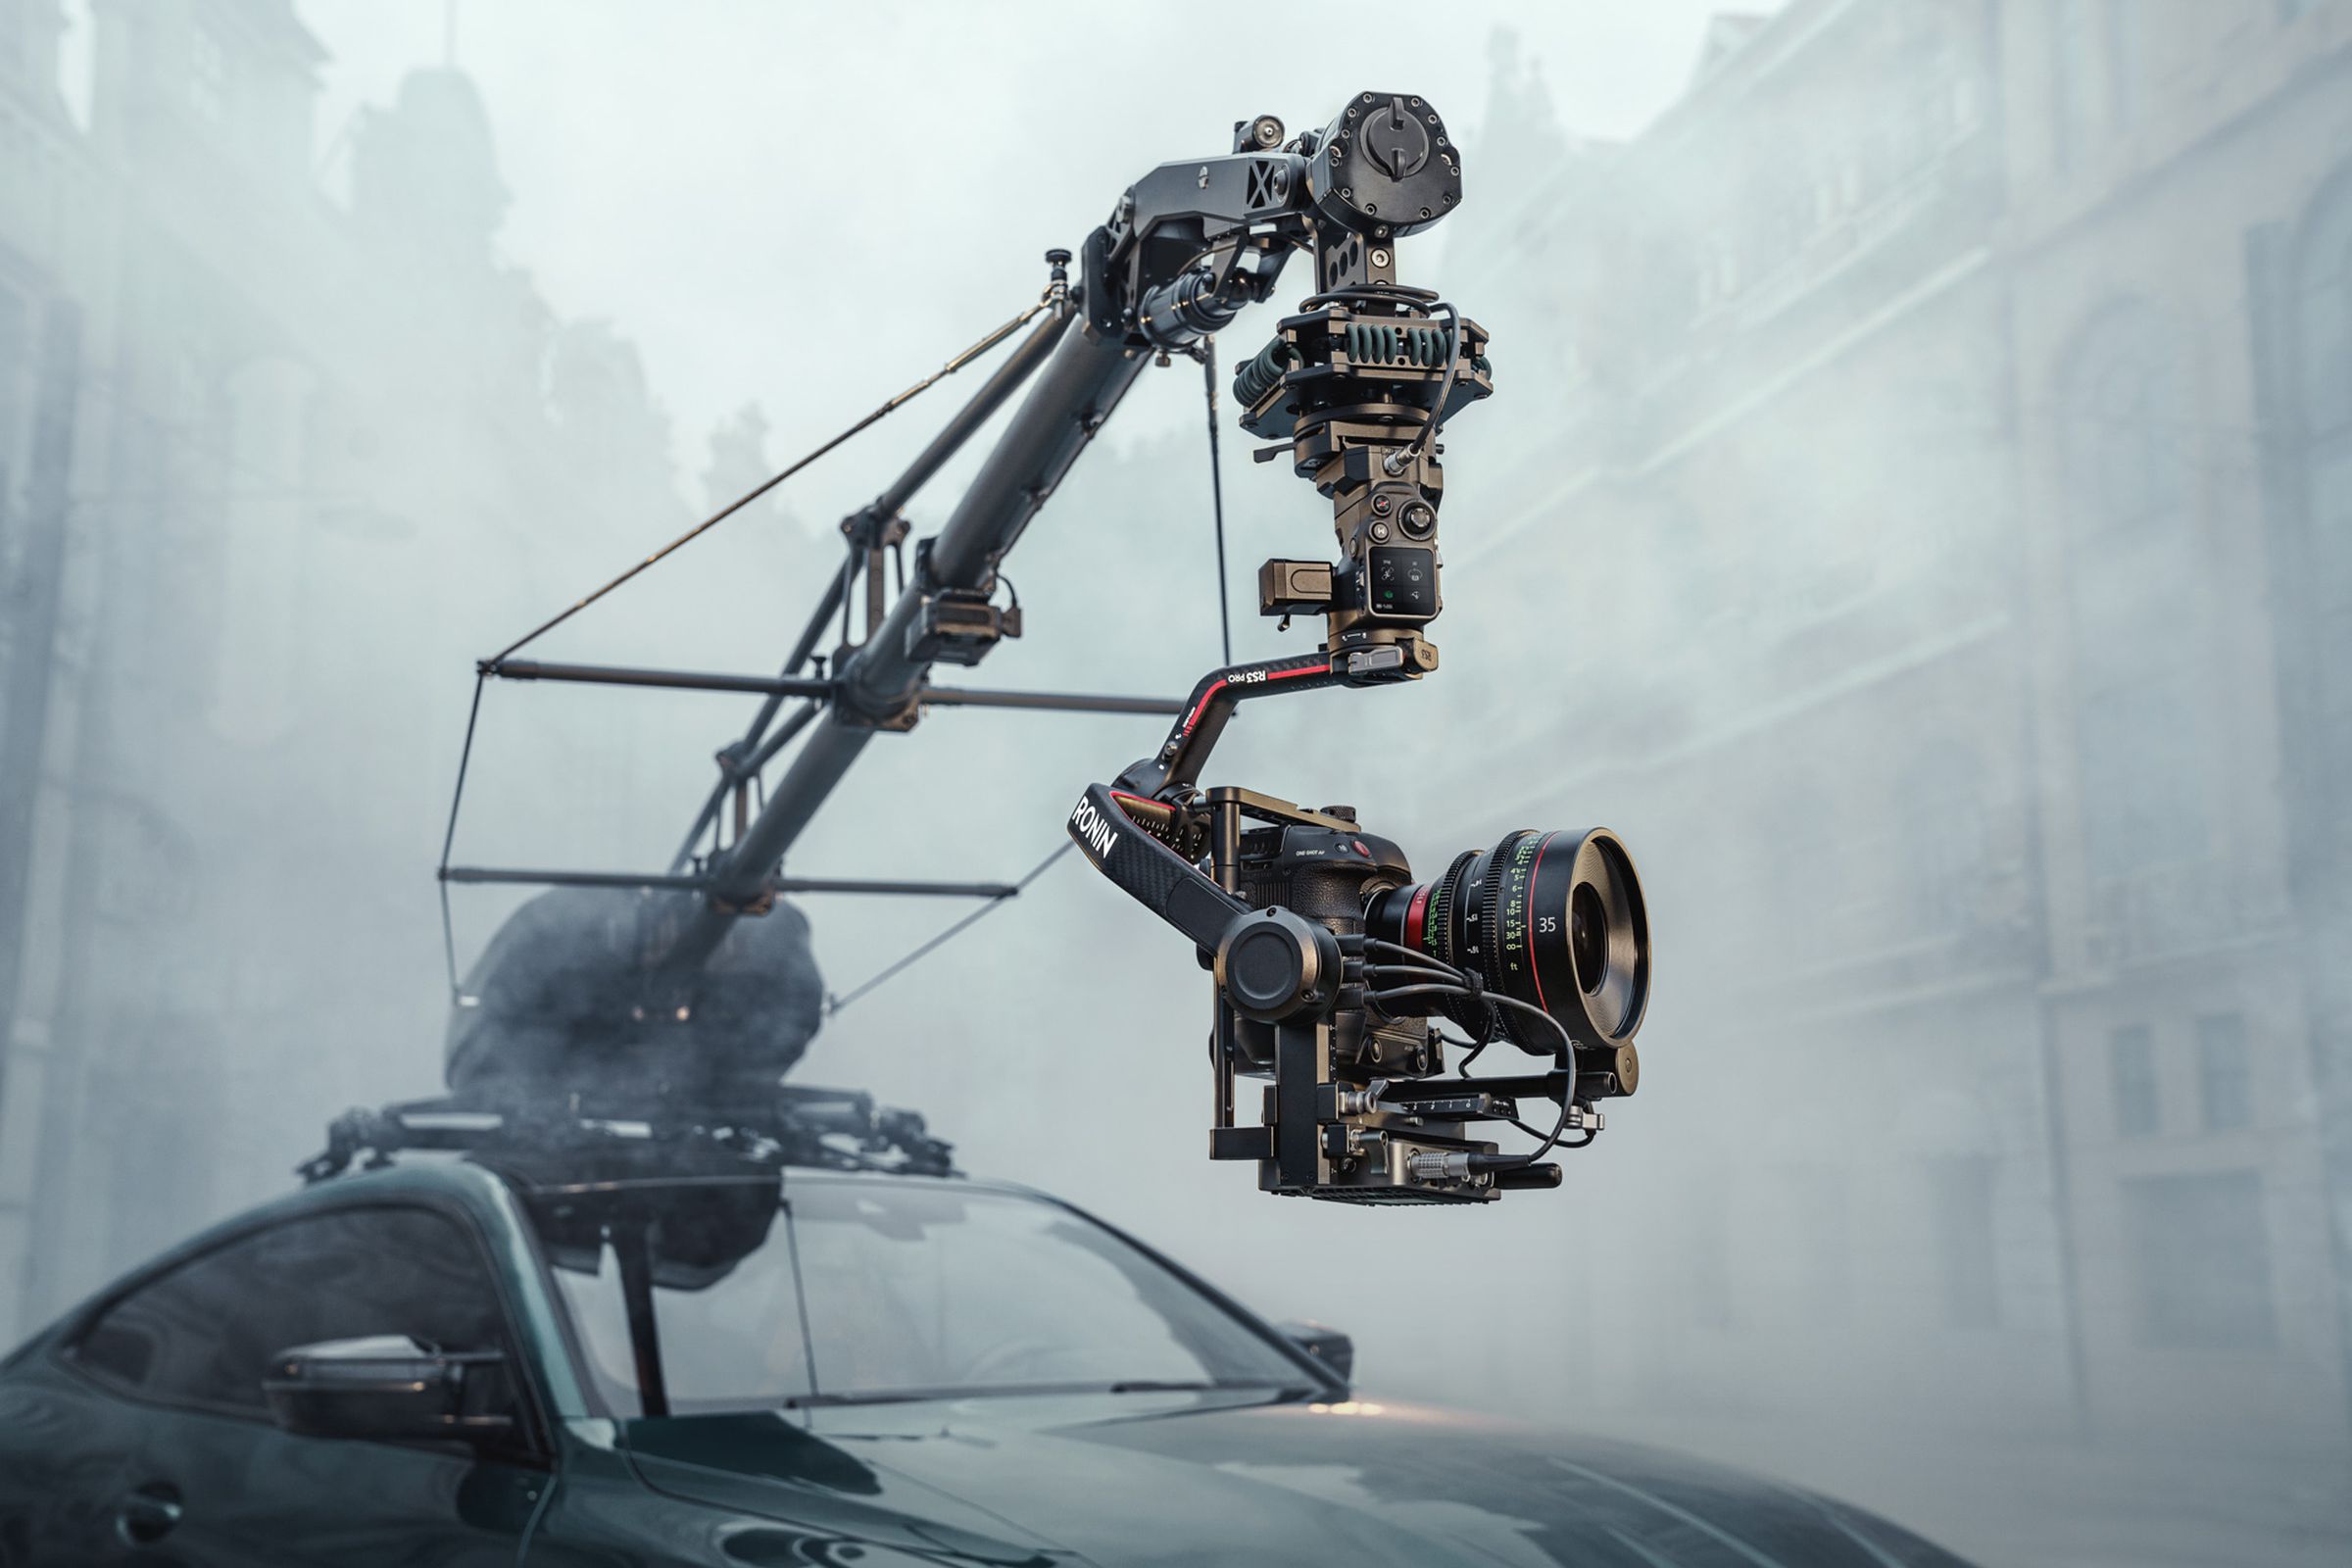 RS 3 Pro can be handheld, but it’s way more fun to mount on a car rig if you have one of those around.